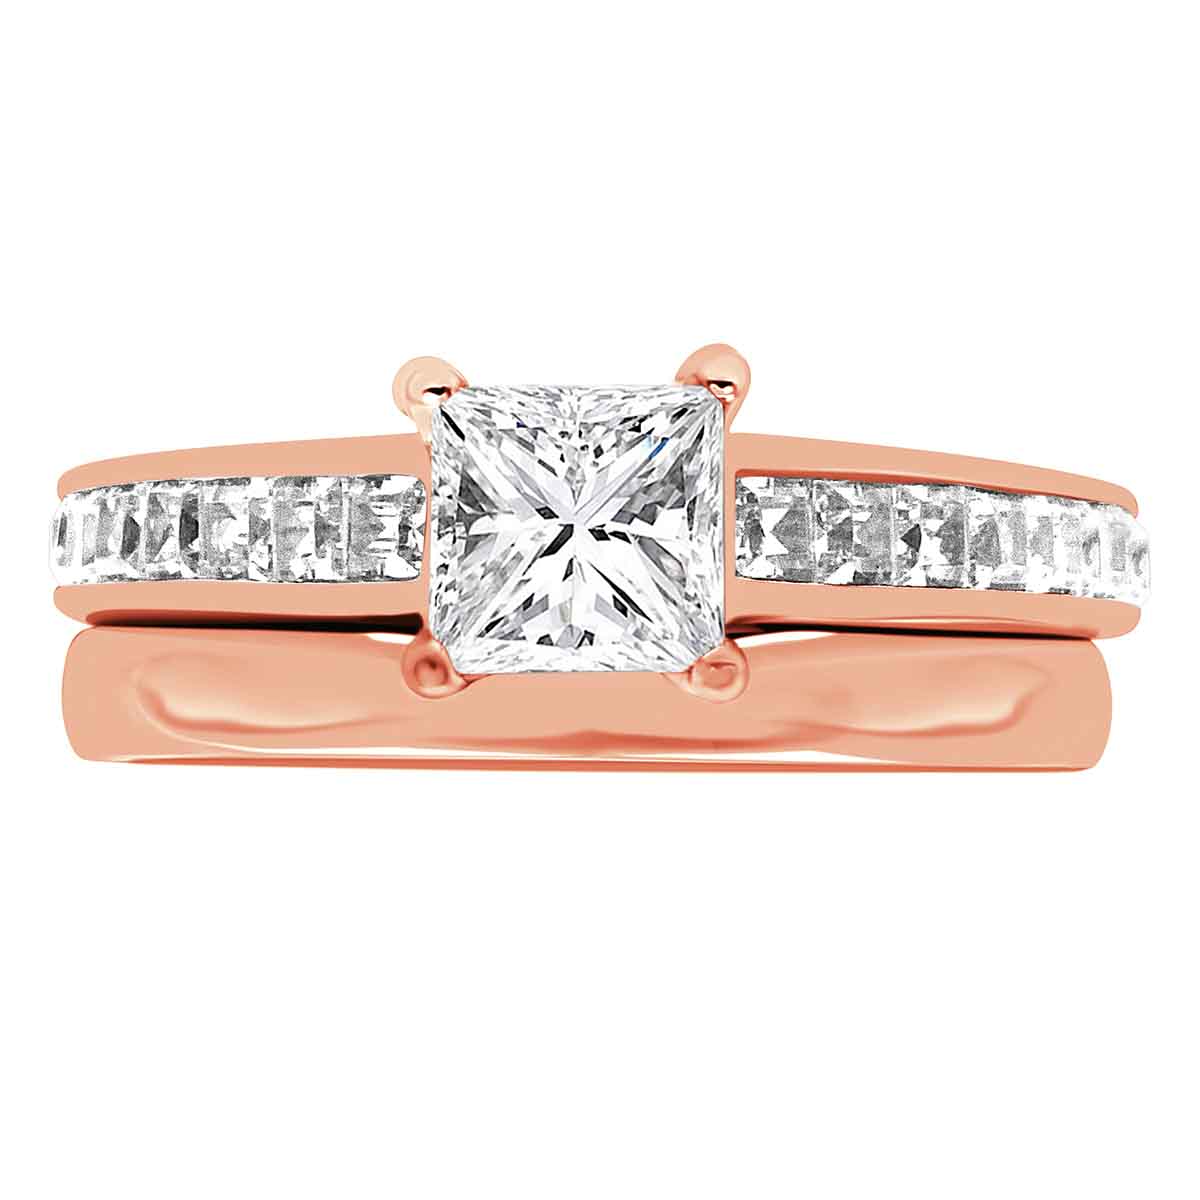 Princess Shape Diamond Ring made from rose and pictured with a plain wedding band gold